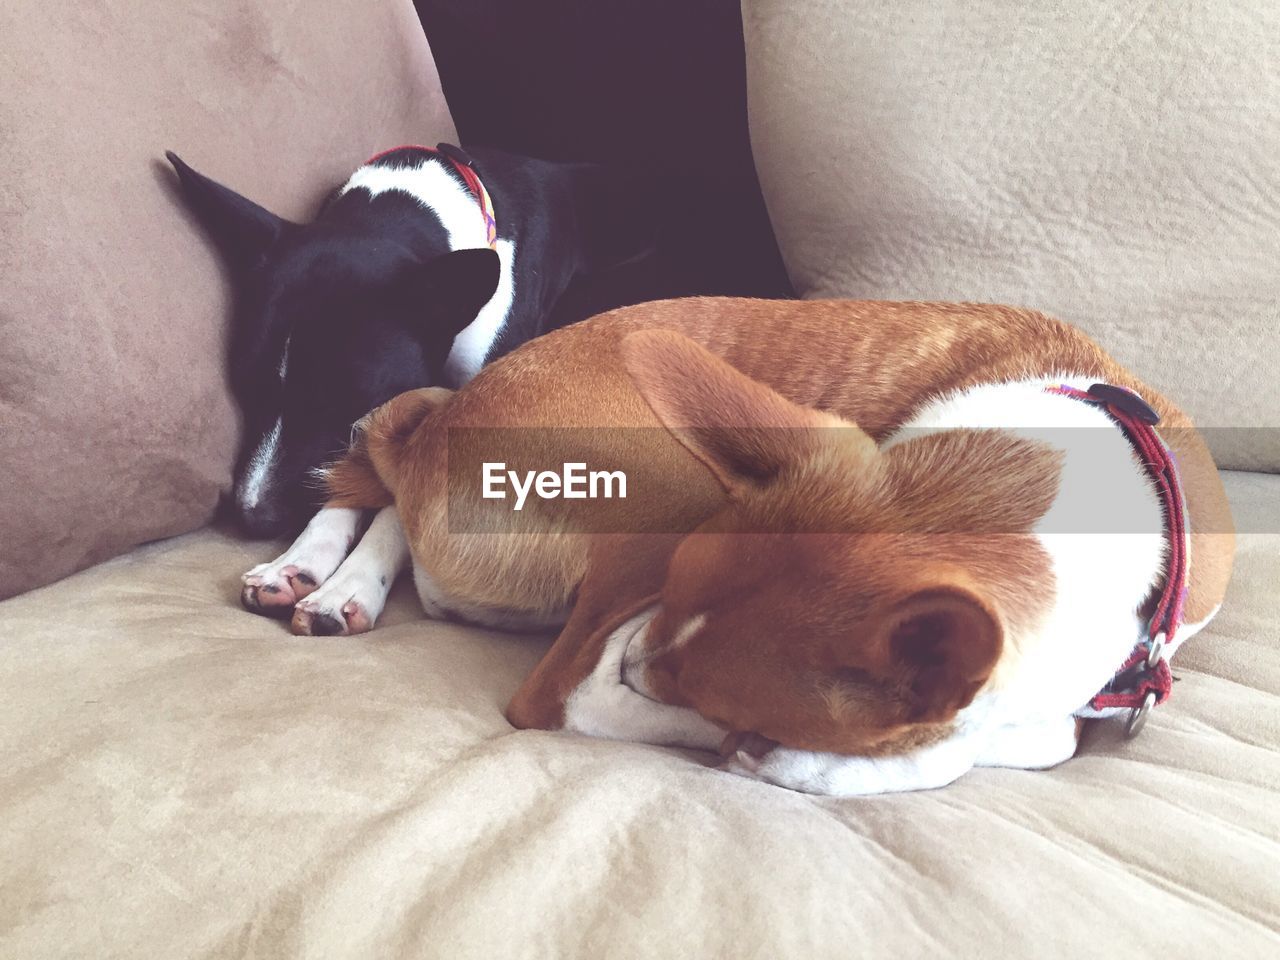 Basenji dogs resting on bed at home